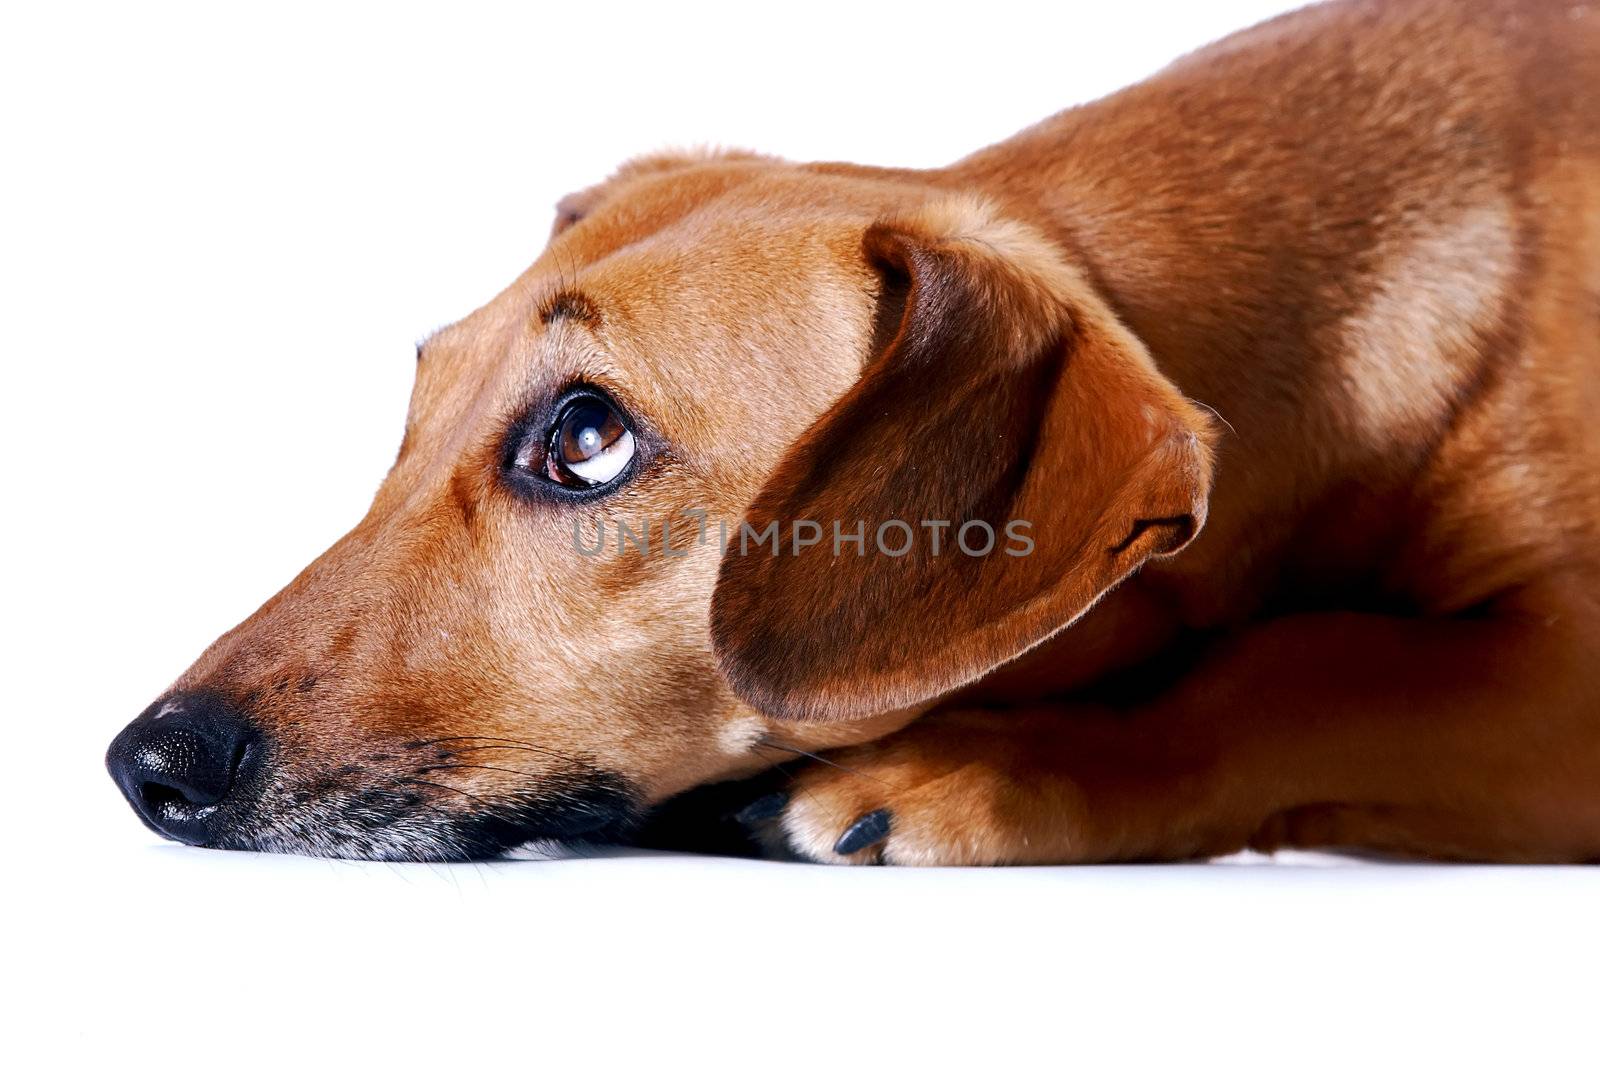 Portrait of the red dachshund on a white background